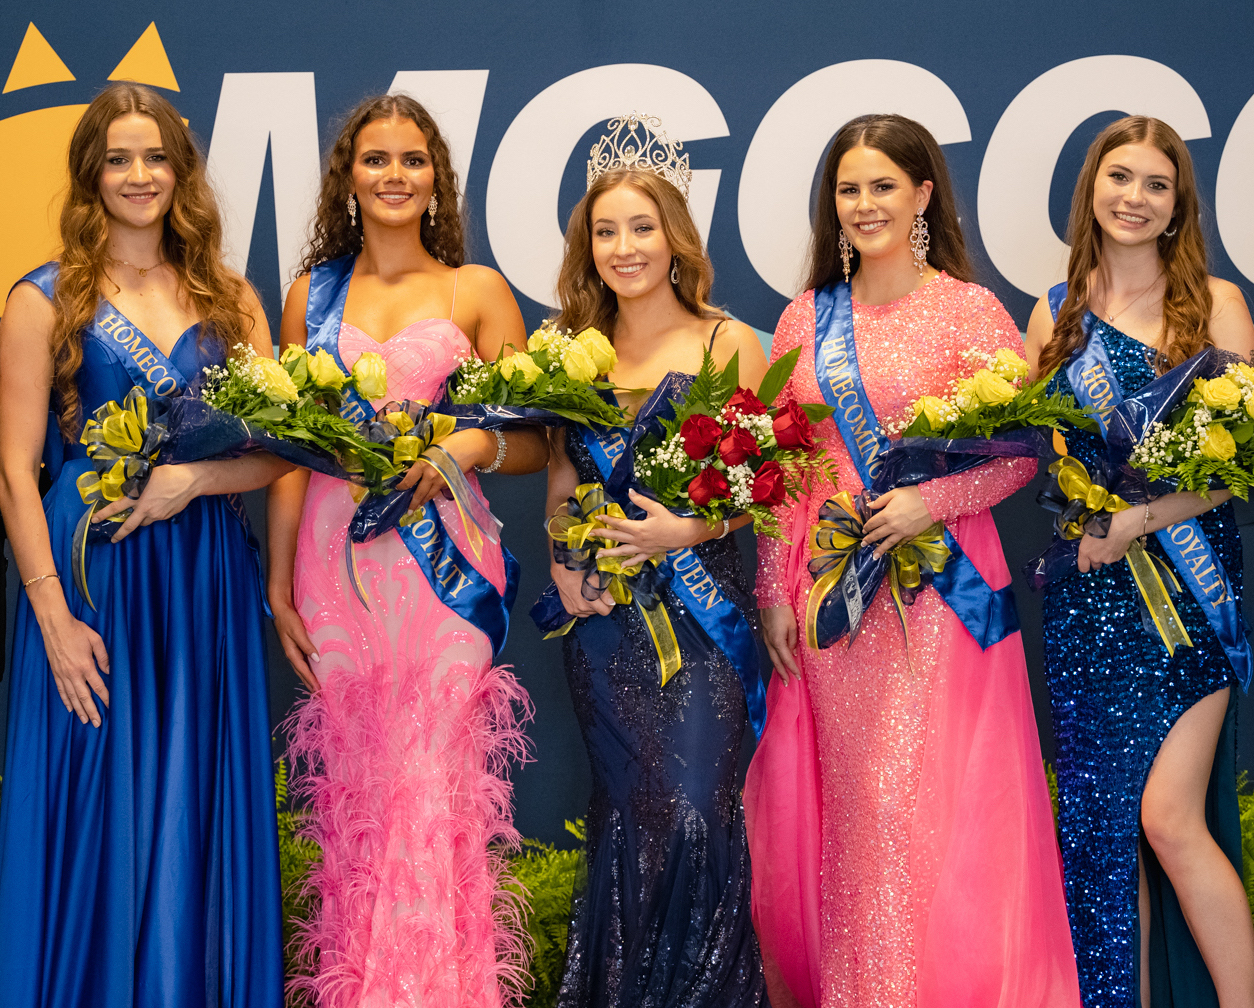 Jackson County Campus Royalty from left, are Emily Montgomery, sophomore royalty; Anna Katherine Noble, freshman royalty; Queen Alyssa Dunnaway; Katey Pryor, sophomore royalty; and Tiffany Stewart, freshman royalty. 